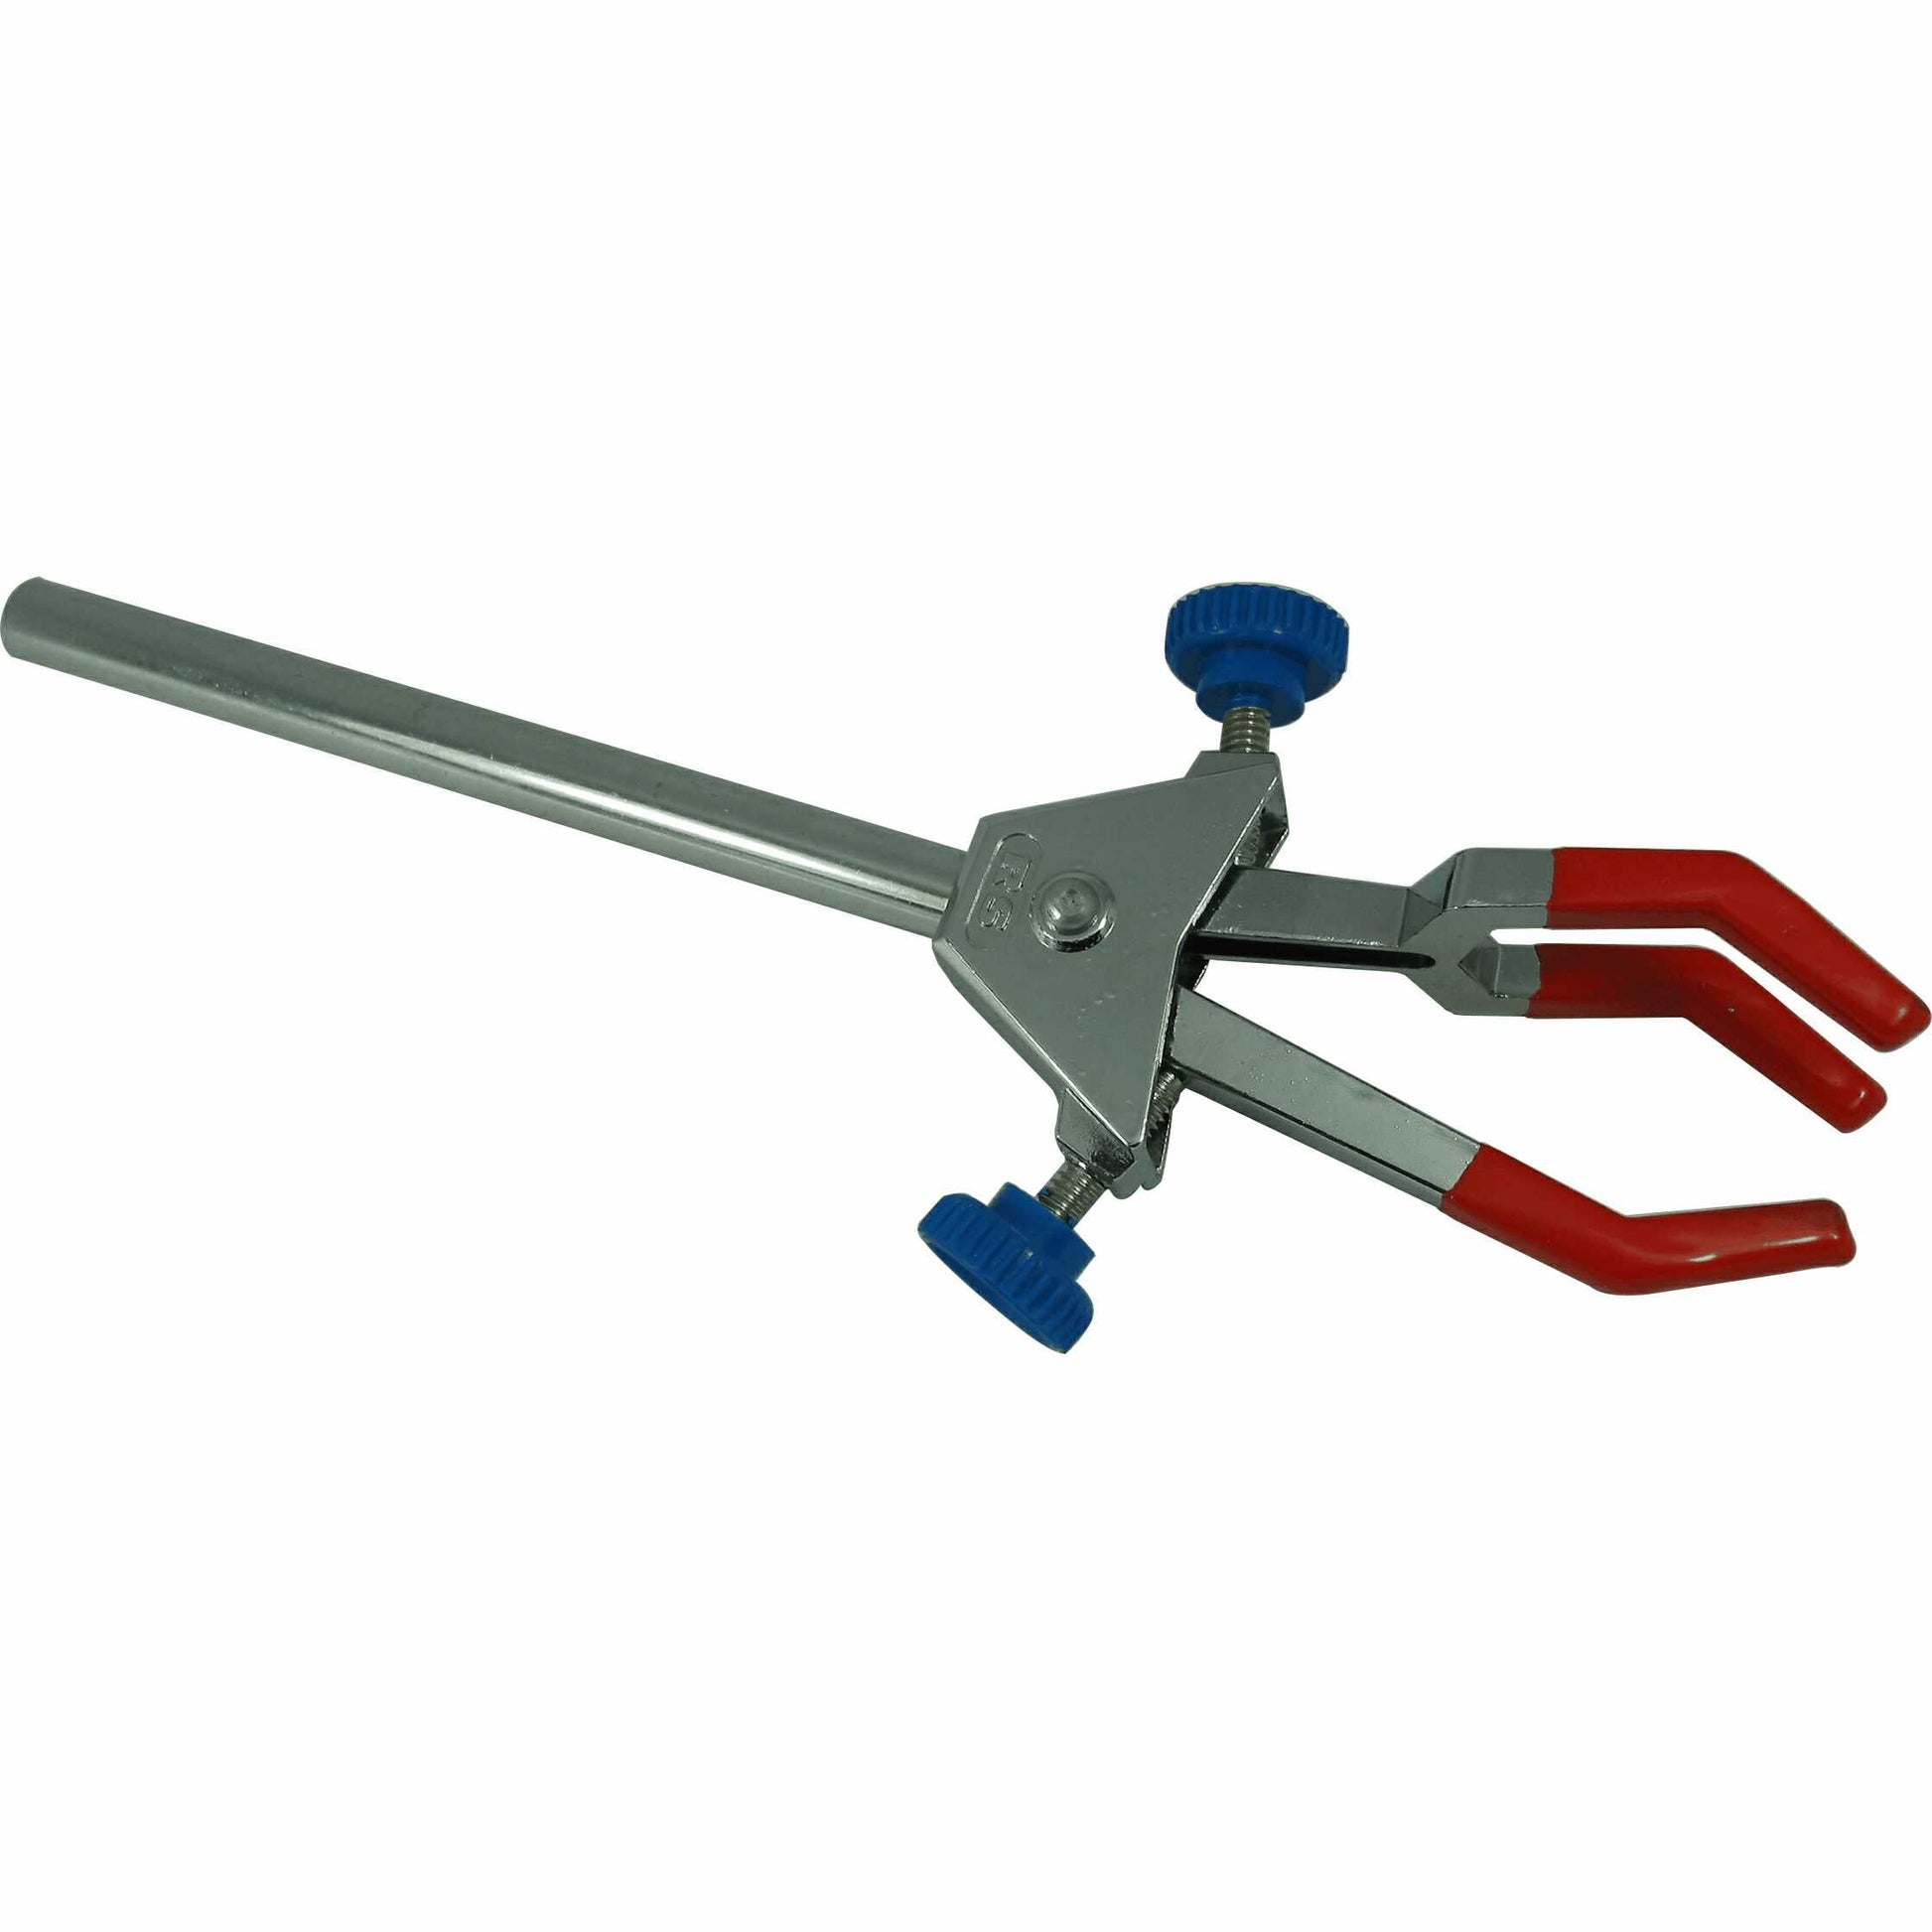 Three Finger Double Adjust-Able Clamp Large Size Accept Objects From 0-70mm